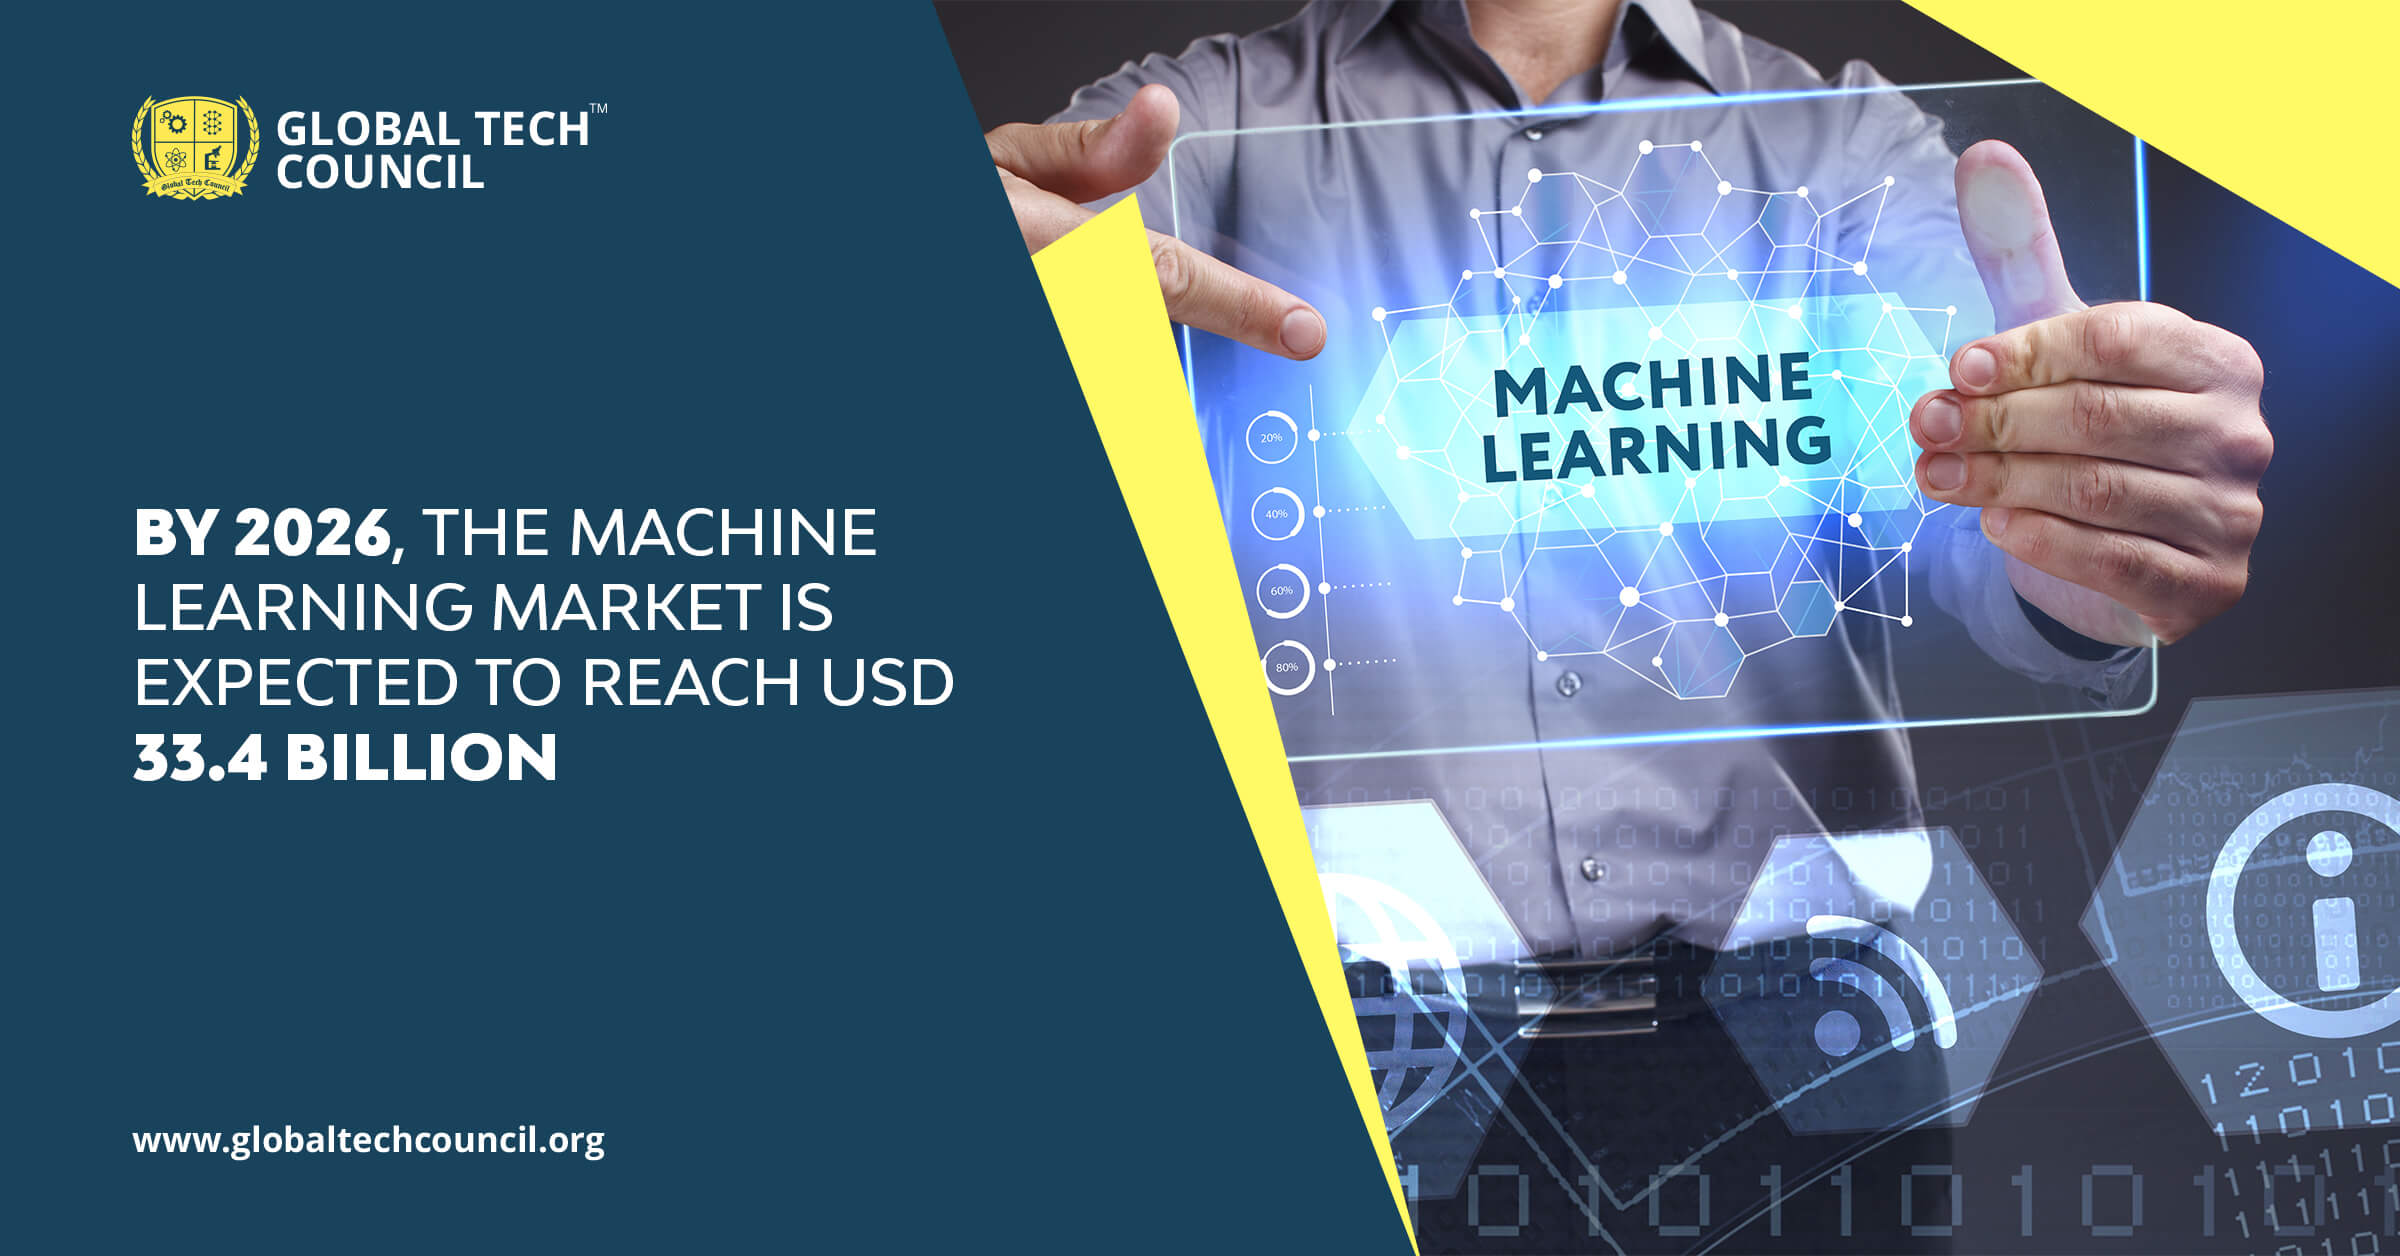 Machine learning market is expected to reach USD 33